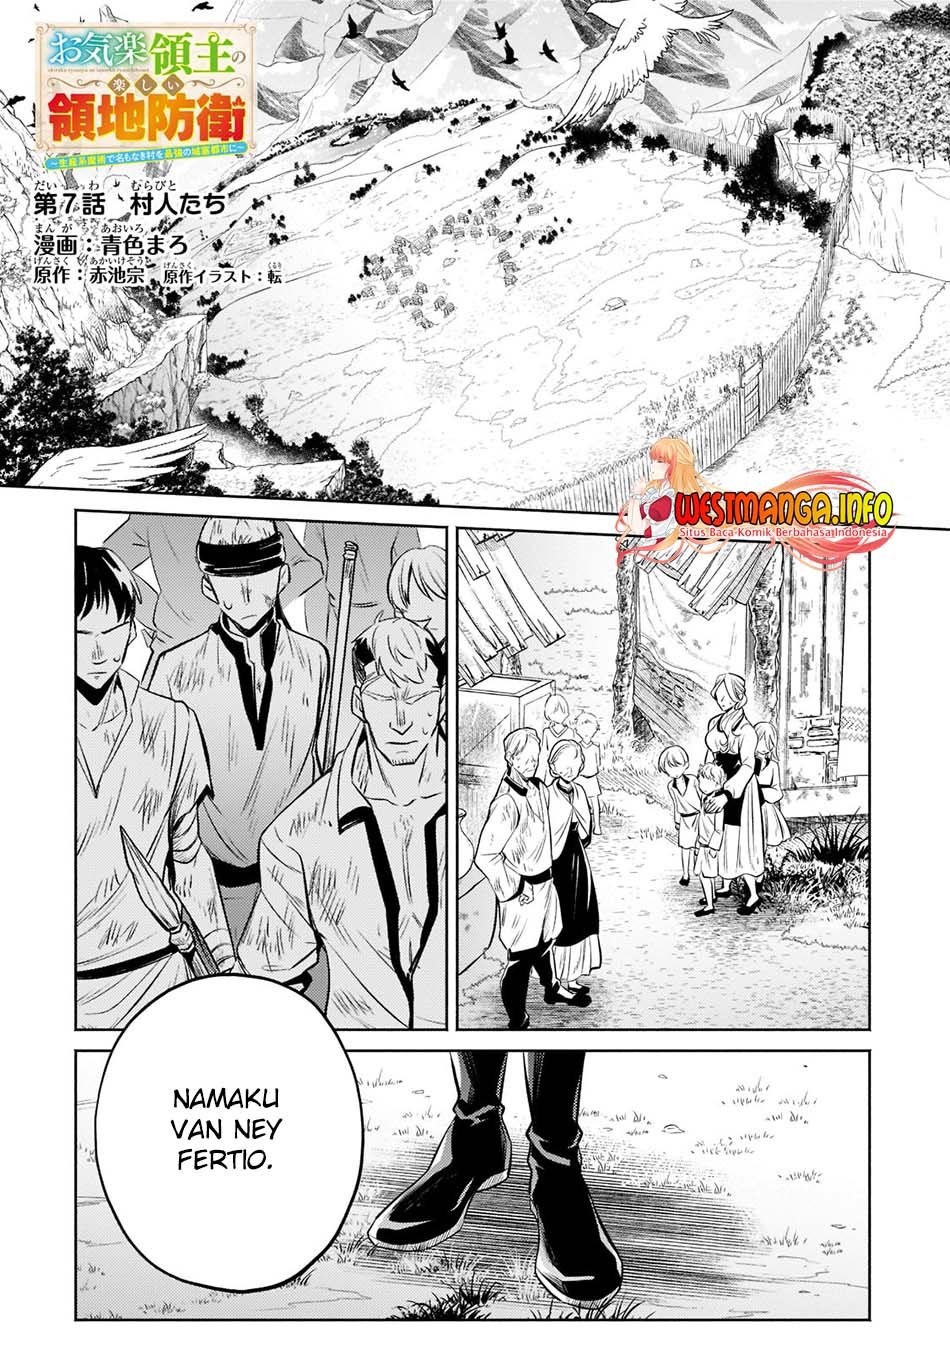 Fun Territory Defense Of The Easy-Going Lord ~The Nameless Village Is Made Into The Strongest Fortified City By Production Magic~ Chapter 07 - 171